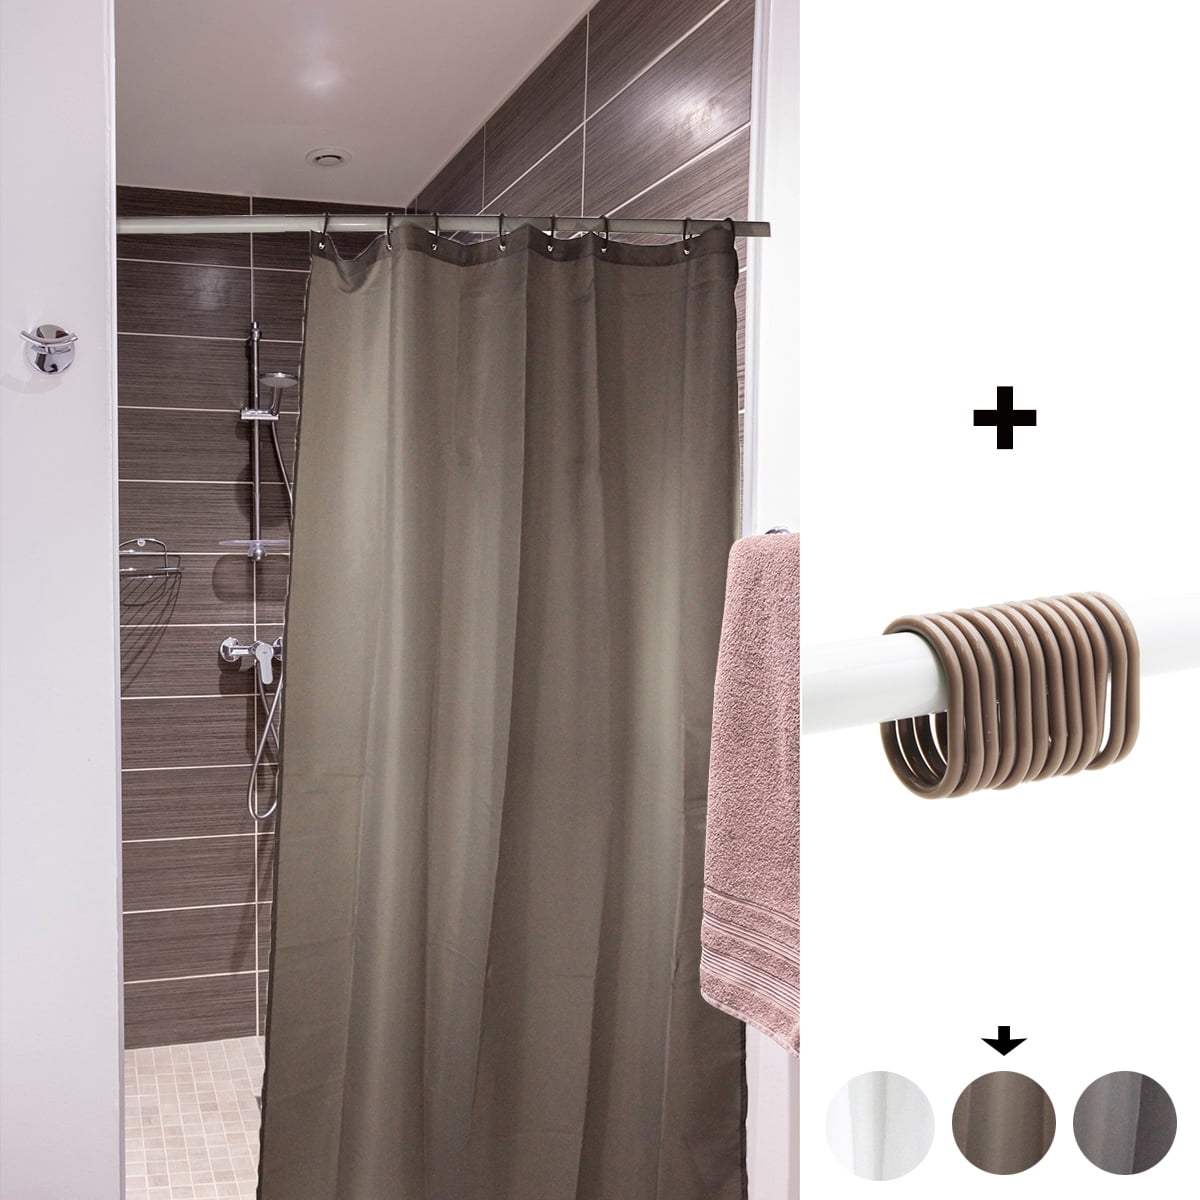 Small Stall Shower Curtain Narrow Size, Shower Stall With Curtain Instead Of Door